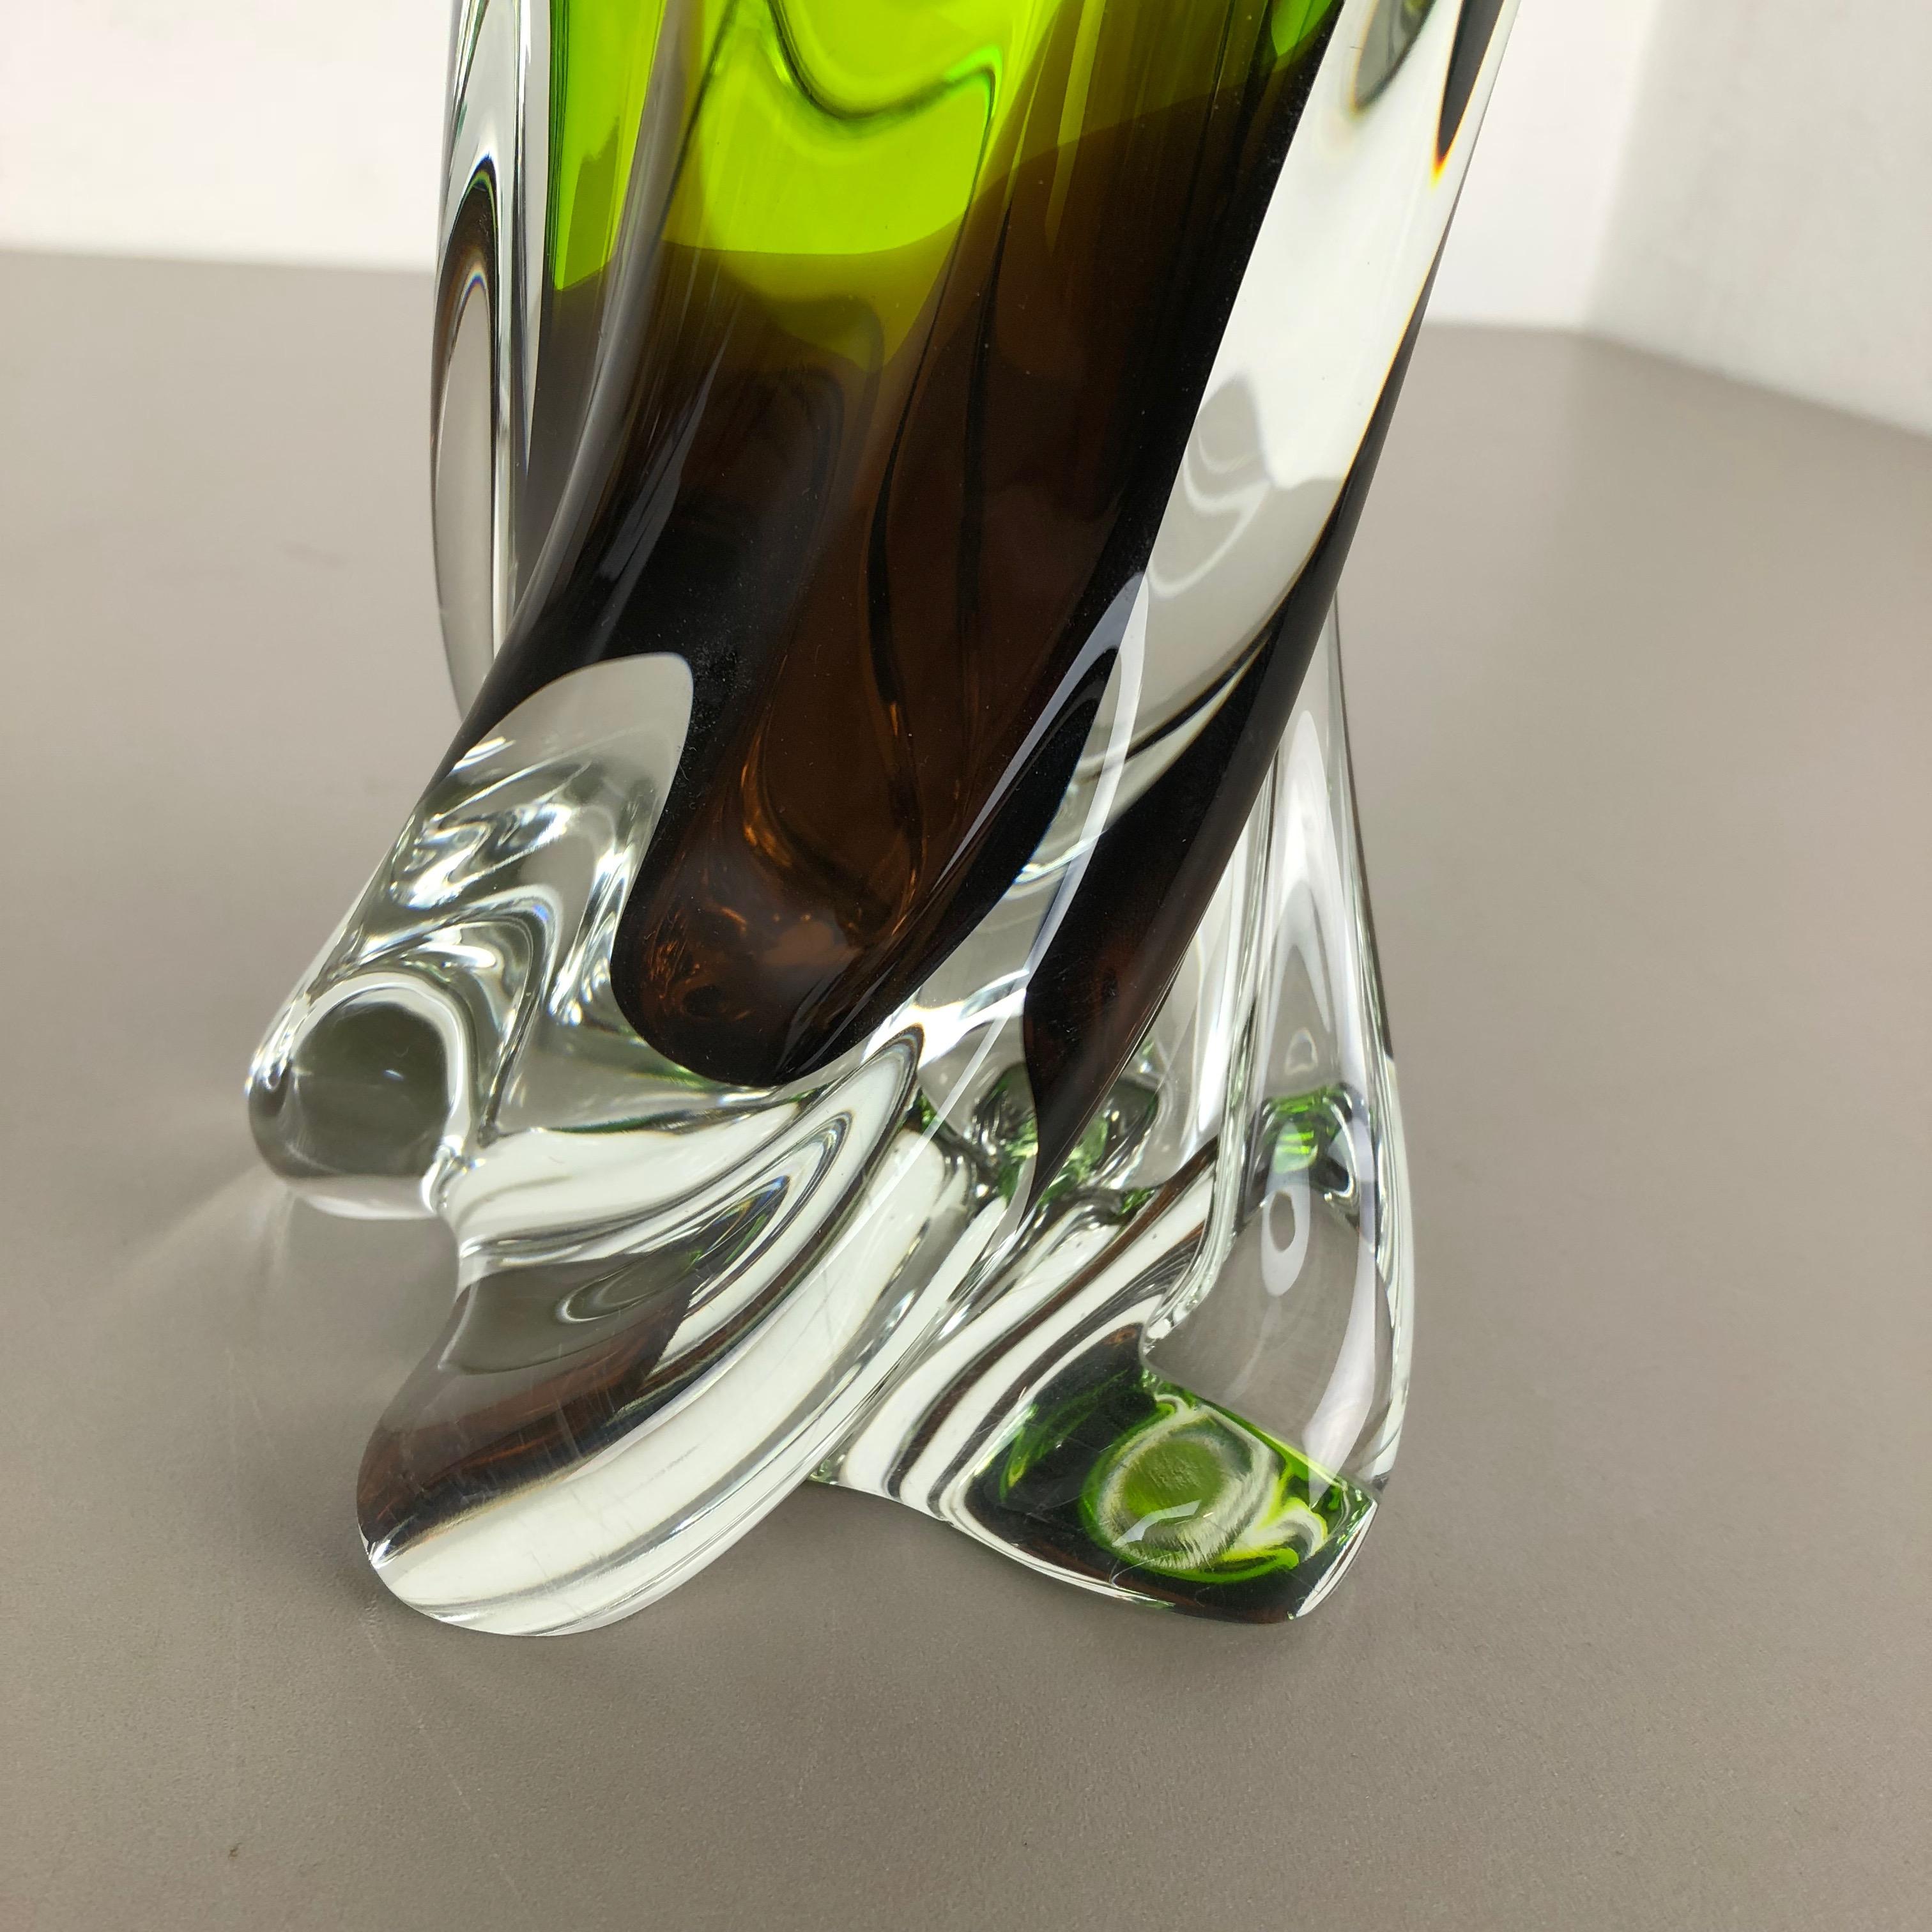 Large Vintage Green Brown Hand Blown Crystal Glass Vase by Joska, Germany, 1970s For Sale 2